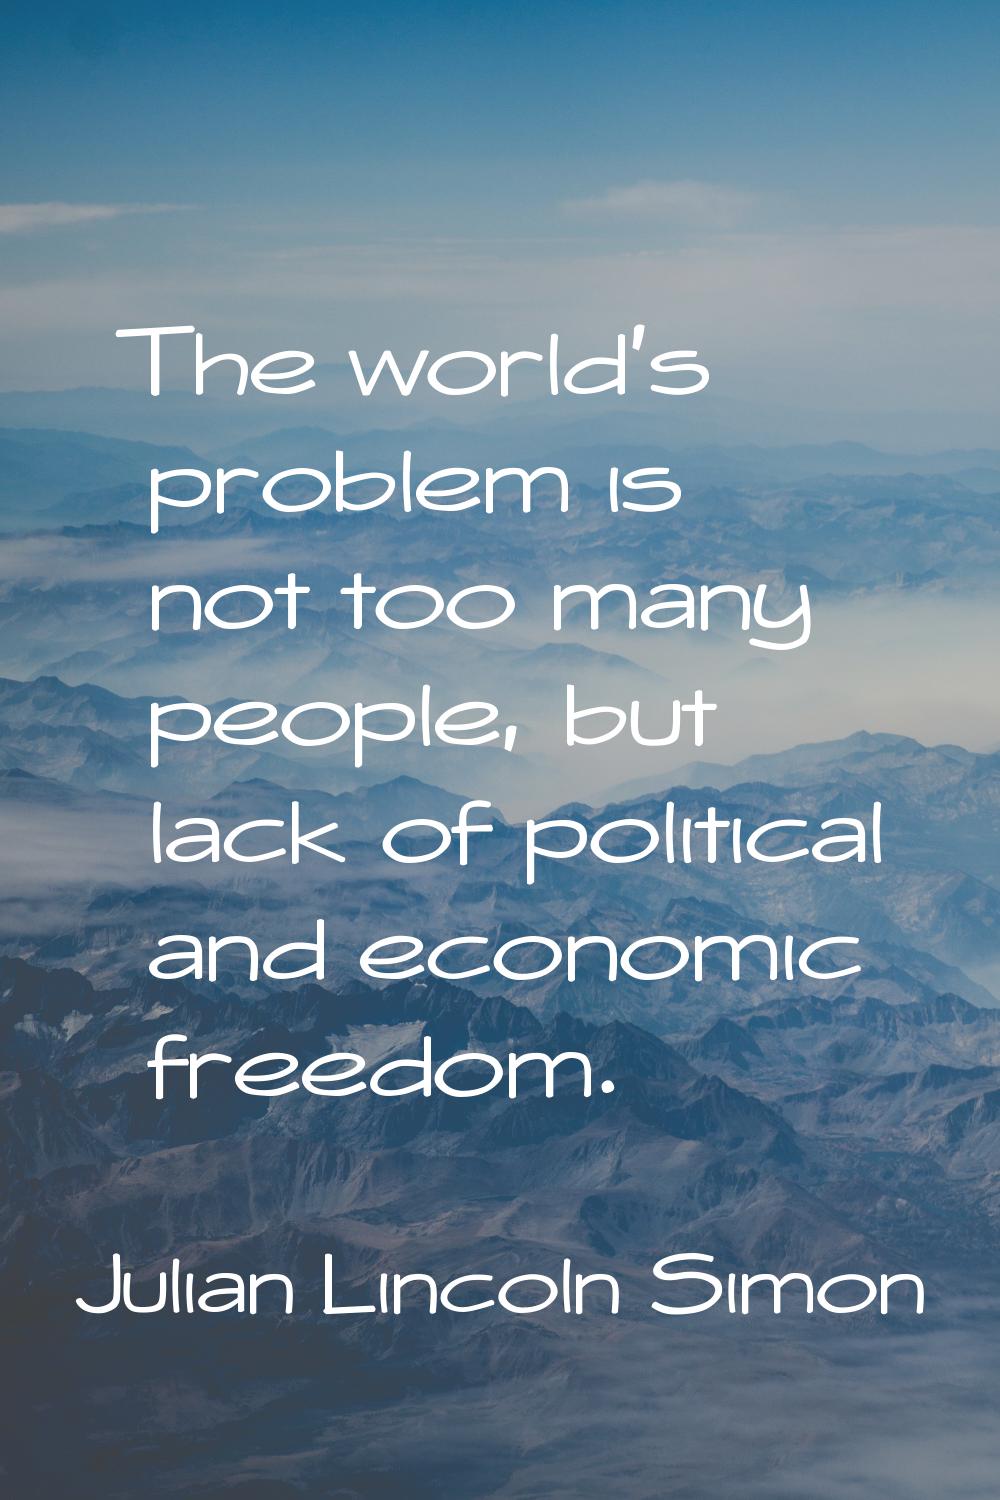 The world's problem is not too many people, but lack of political and economic freedom.